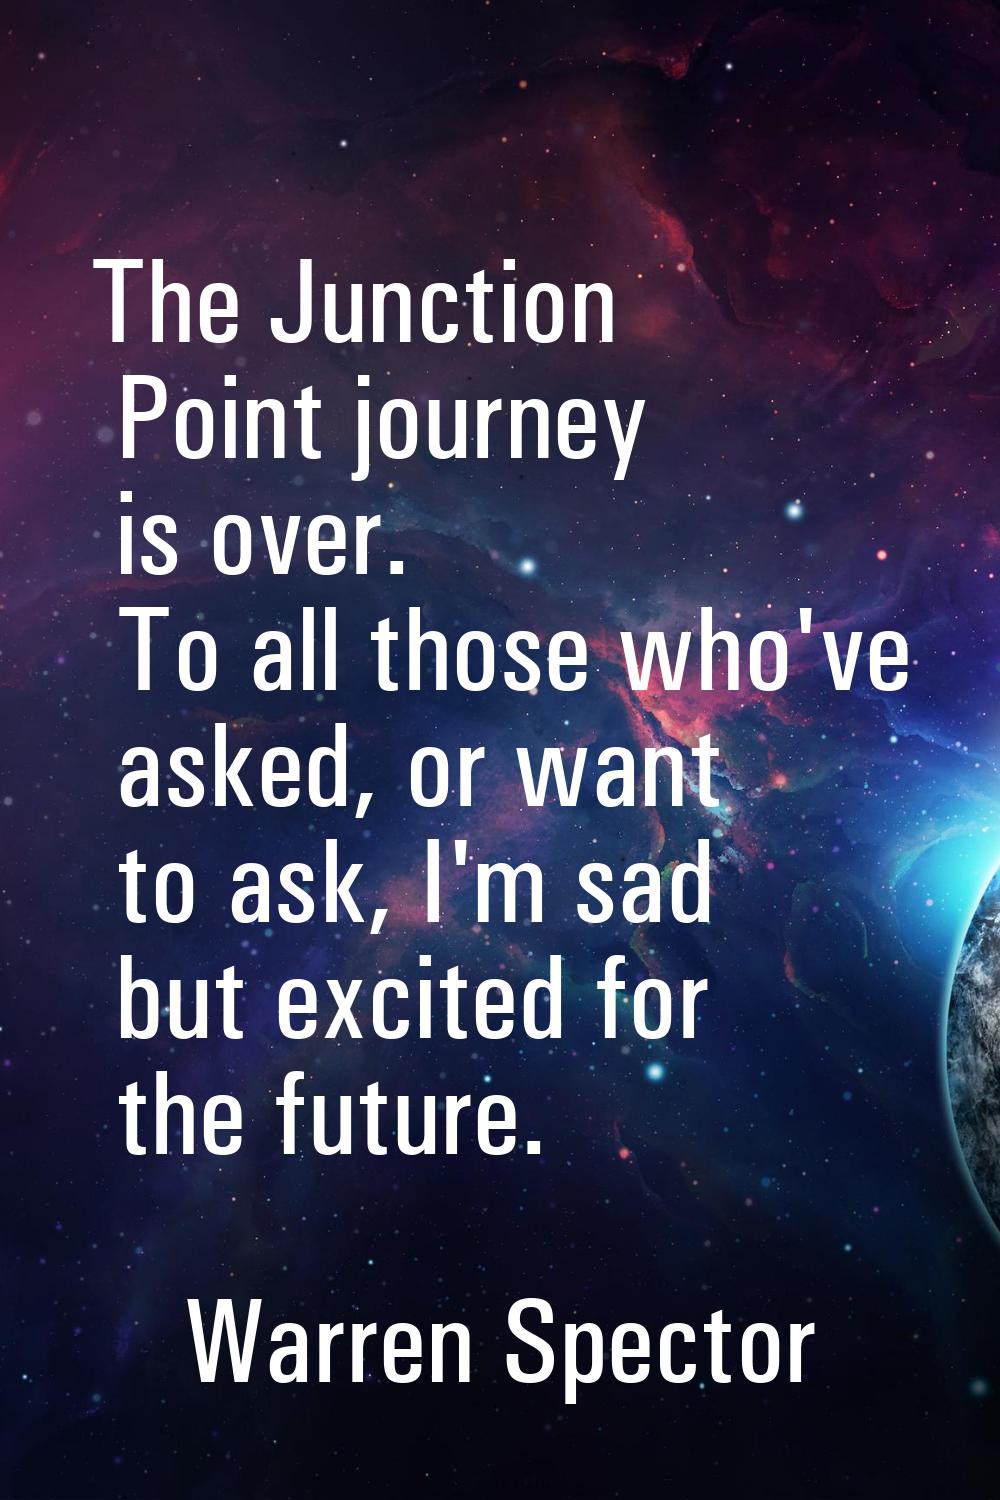 The Junction Point journey is over. To all those who've asked, or want to ask, I'm sad but excited 